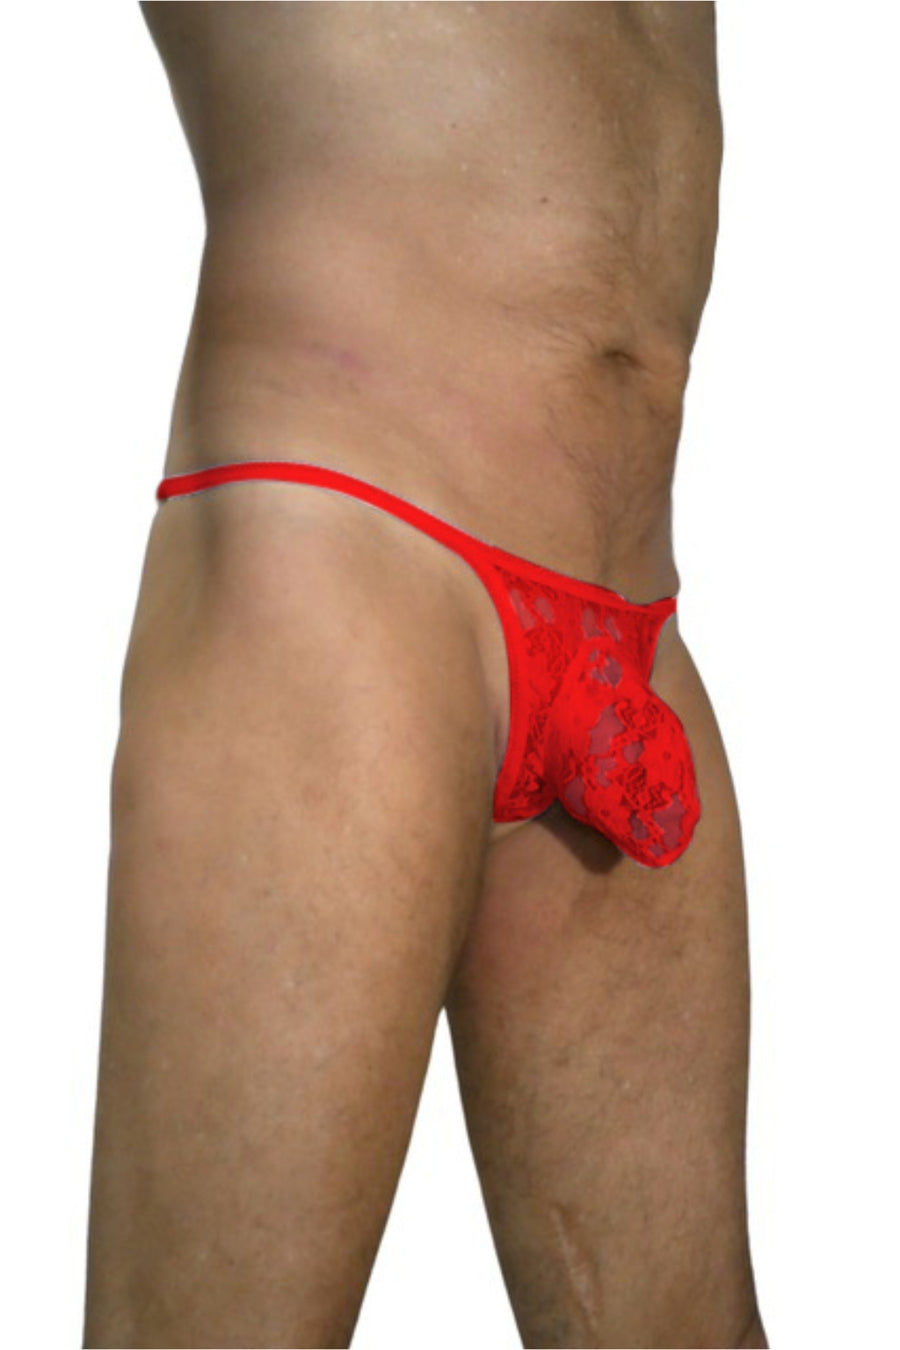 BfM Mens Lace Bulge Pouch G-String Underwear